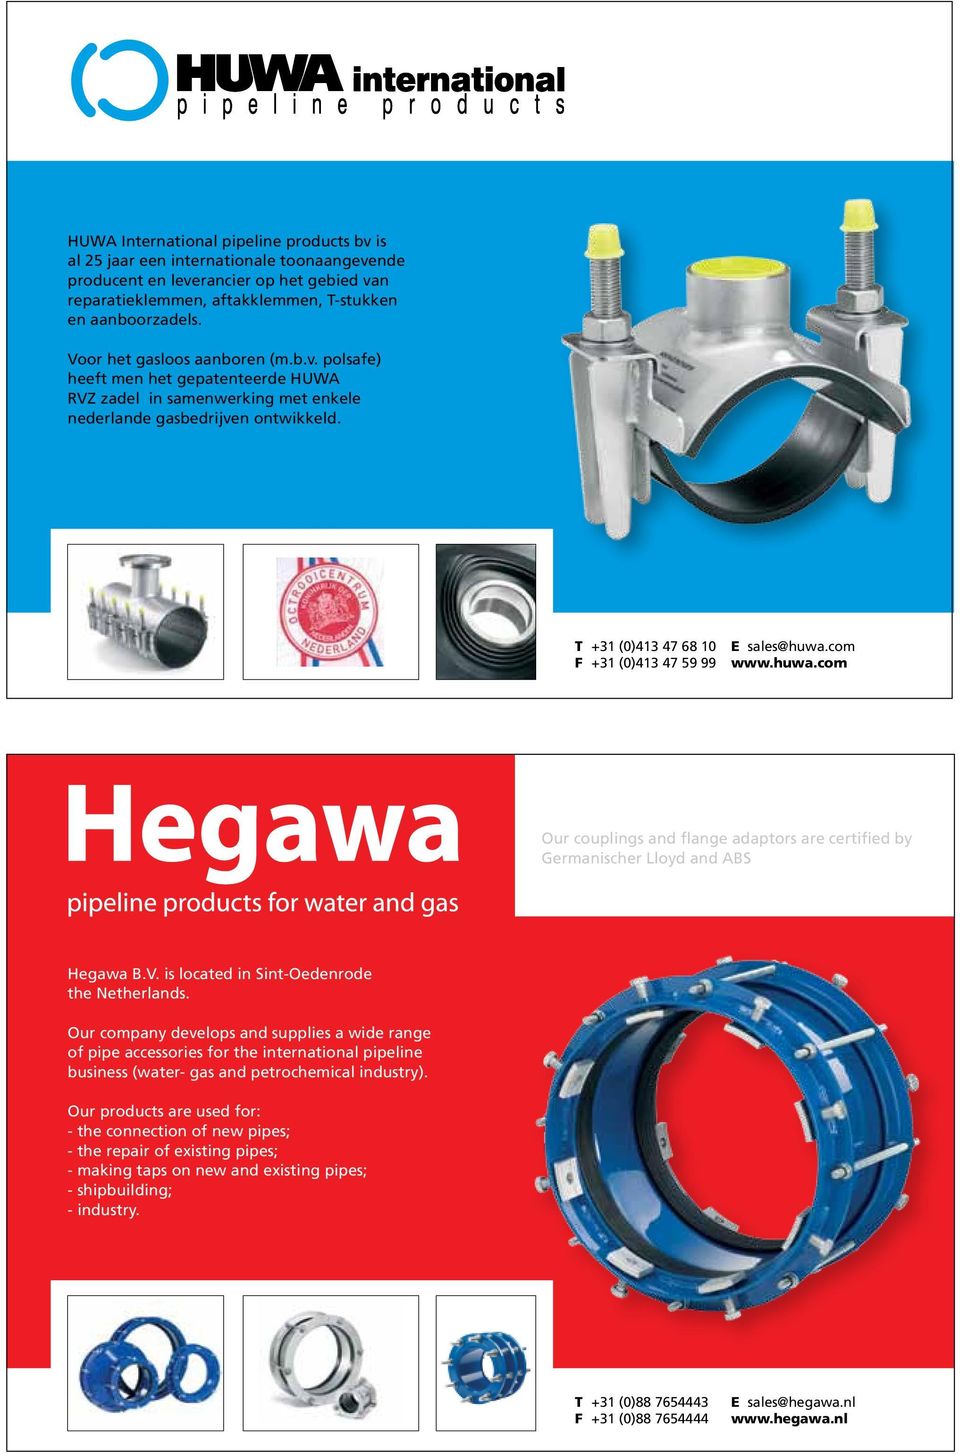 T +31 (0)413 47 68 10 F +31 (0)413 47 59 99 E sales@huwa.com www.huwa.com Our couplings and flange adaptors are certified by Germanischer Lloyd and ABS Hegawa B.V.